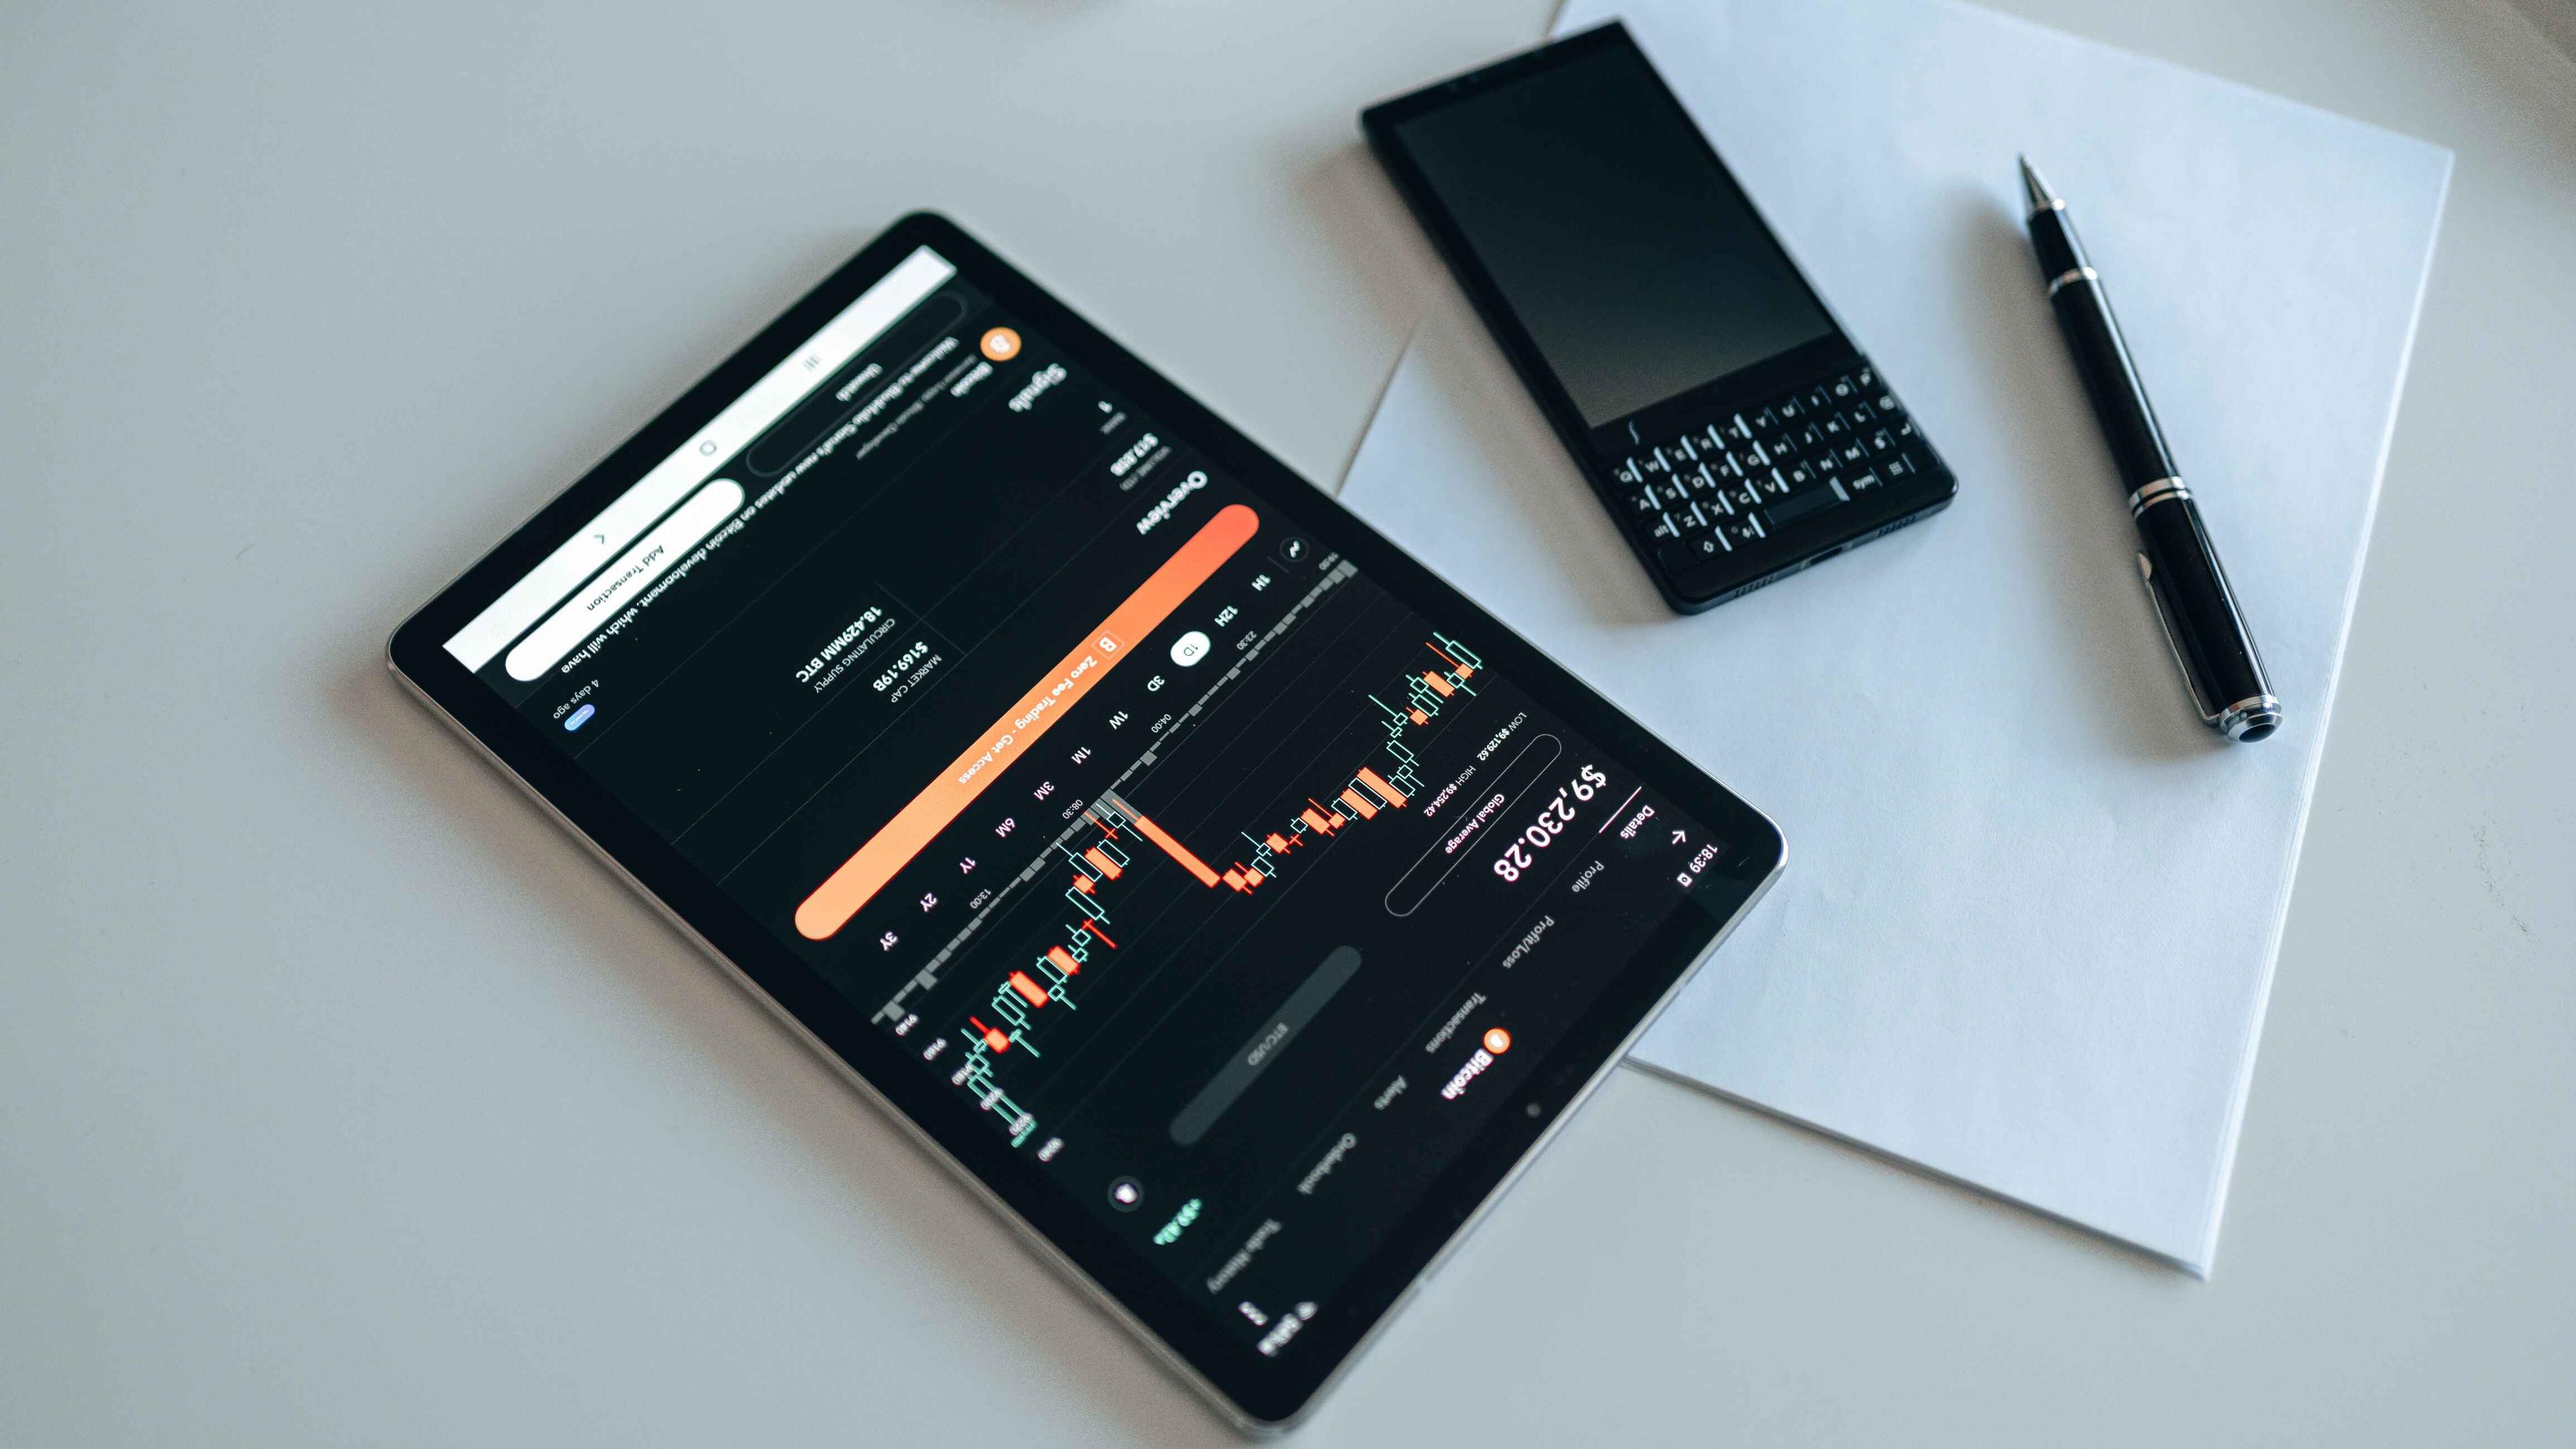 A black tablet with the crypto market on it next to a black phone and a black pen on a white piece of paper all on a table.